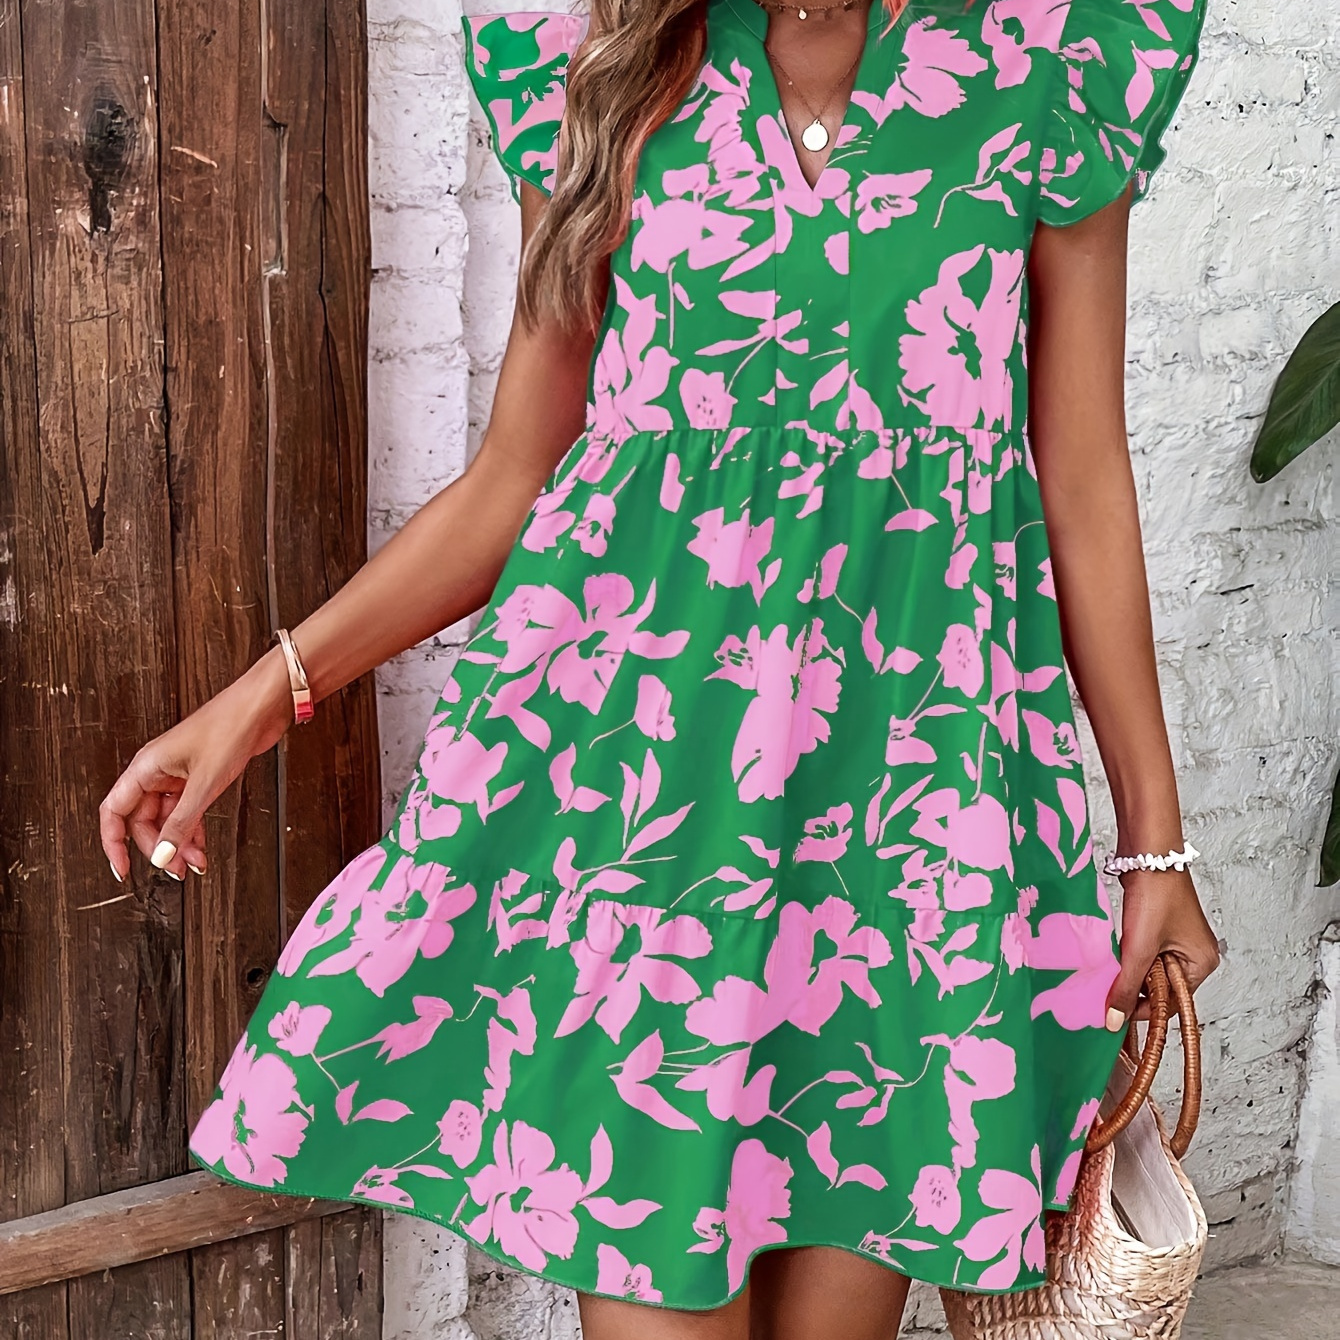 

Floral Print V-neck Dress, Vacation Style Ruffle Sleeve Trapeze Dress For Spring & Summer, Women's Clothing